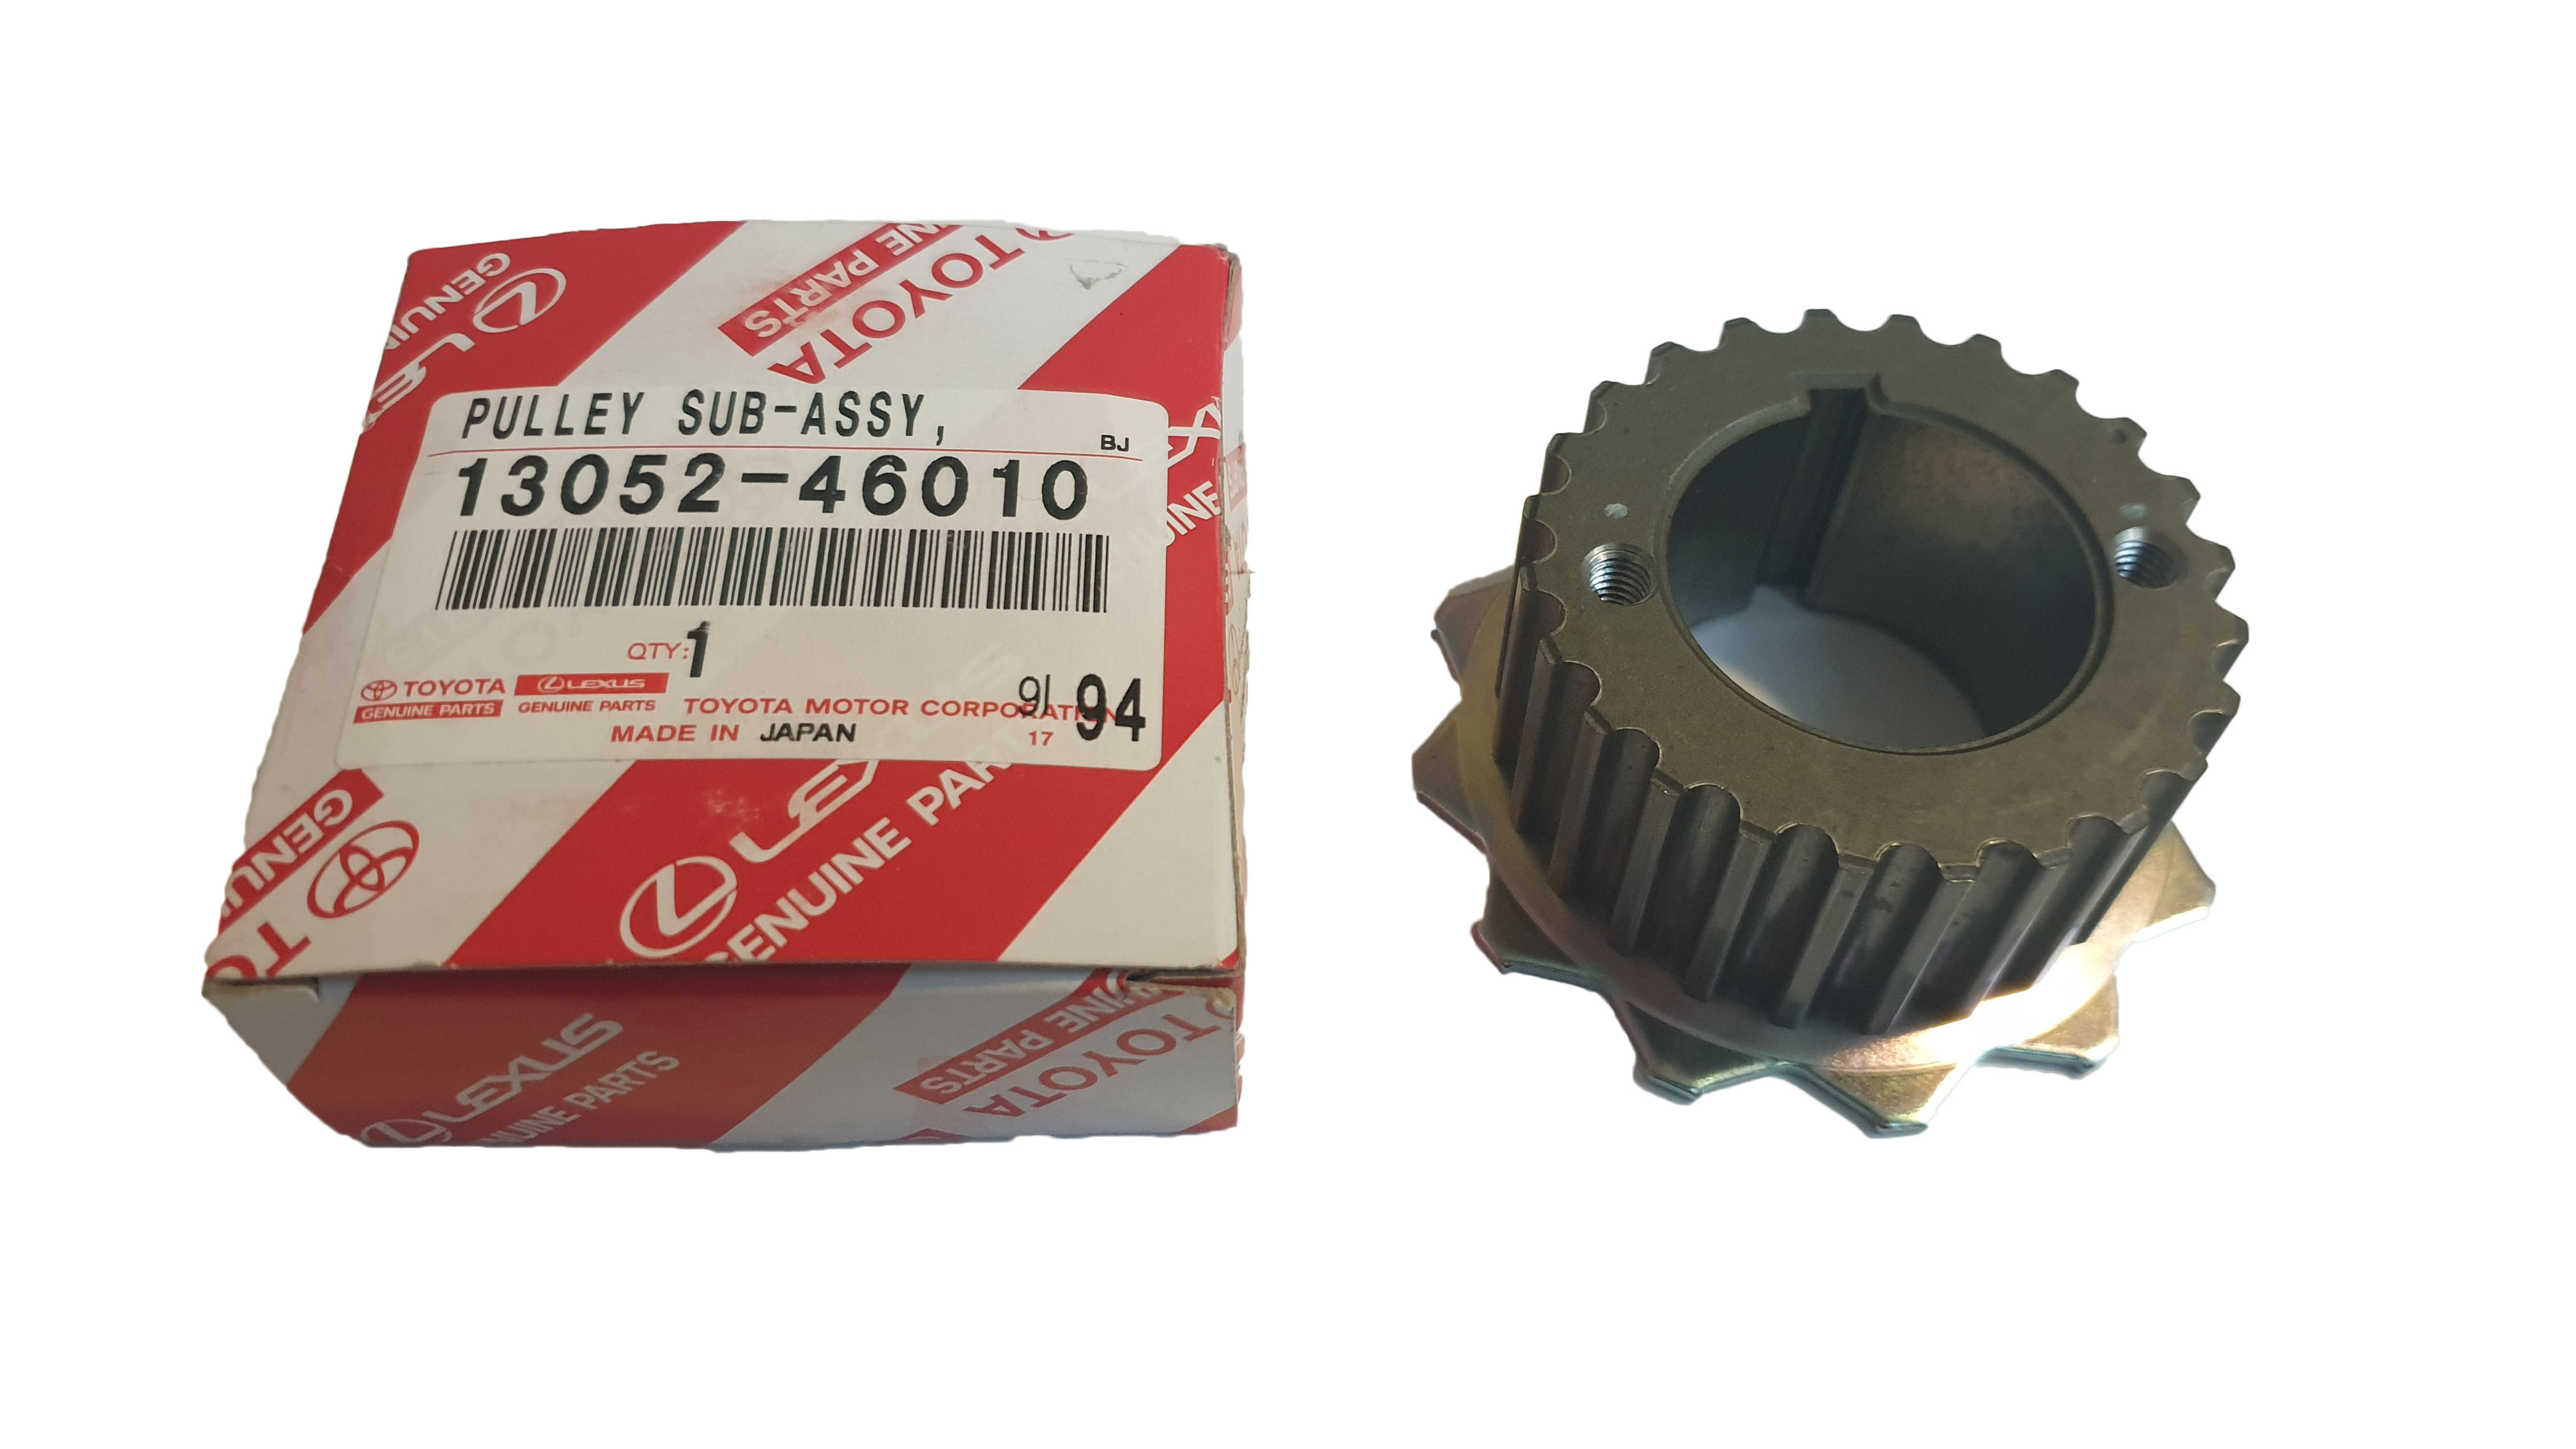 Toyota OEM 1JZ and 2JZ timing gear